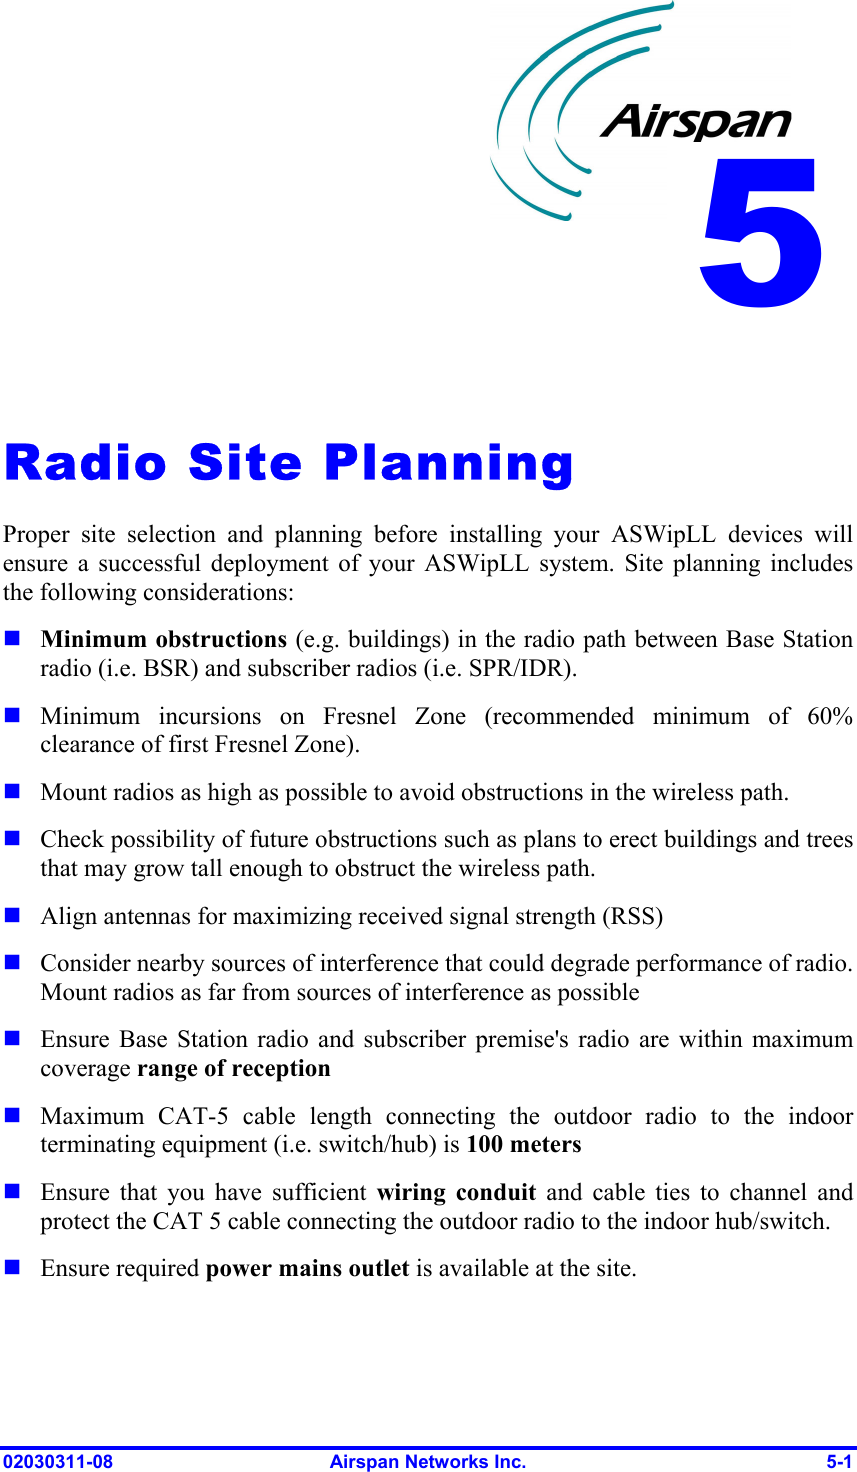  02030311-08  Airspan Networks Inc.  5-1   Radio Site Planning Proper site selection and planning before installing your ASWipLL devices will ensure a successful deployment of your ASWipLL system. Site planning includes the following considerations:  Minimum obstructions (e.g. buildings) in the radio path between Base Station radio (i.e. BSR) and subscriber radios (i.e. SPR/IDR).  Minimum incursions on Fresnel Zone (recommended minimum of 60% clearance of first Fresnel Zone).  Mount radios as high as possible to avoid obstructions in the wireless path.   Check possibility of future obstructions such as plans to erect buildings and trees that may grow tall enough to obstruct the wireless path.  Align antennas for maximizing received signal strength (RSS)   Consider nearby sources of interference that could degrade performance of radio. Mount radios as far from sources of interference as possible  Ensure Base Station radio and subscriber premise&apos;s radio are within maximum coverage range of reception  Maximum CAT-5 cable length connecting the outdoor radio to the indoor terminating equipment (i.e. switch/hub) is 100 meters  Ensure that you have sufficient wiring conduit and cable ties to channel and protect the CAT 5 cable connecting the outdoor radio to the indoor hub/switch.  Ensure required power mains outlet is available at the site. 5 